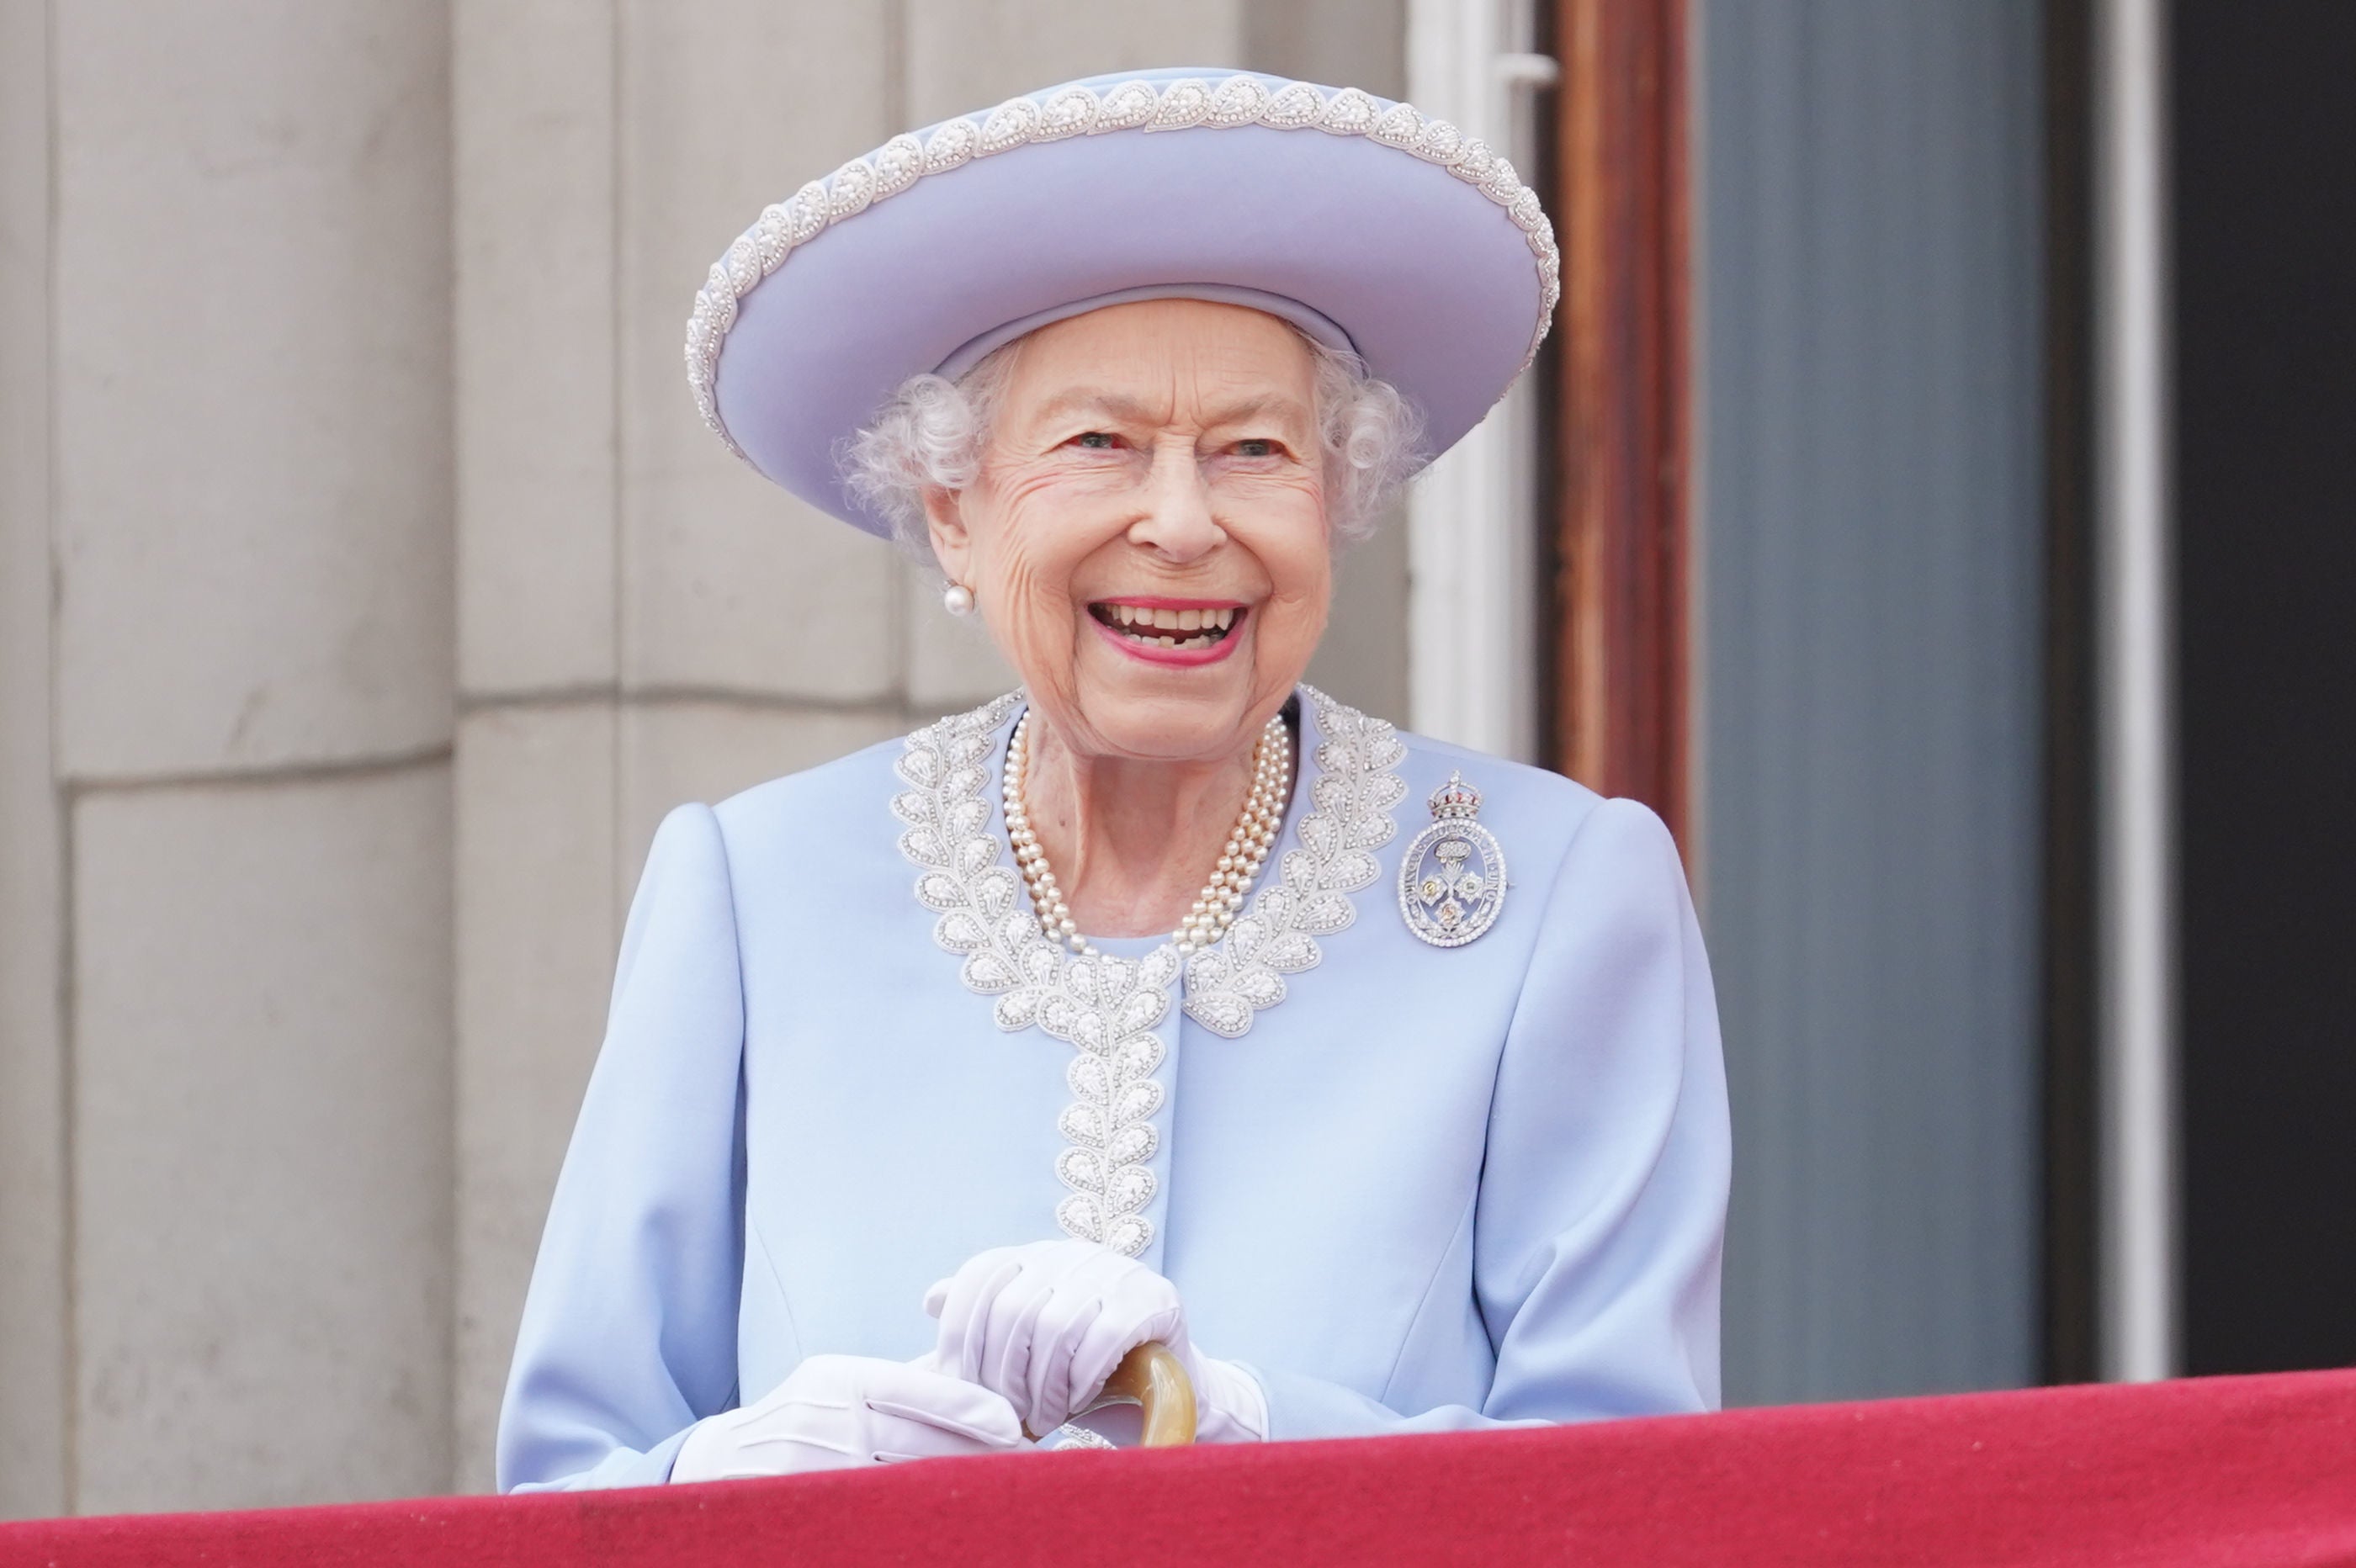 The Queen on the balcony at Buckingham Palace (Jonathan Brady/PA)